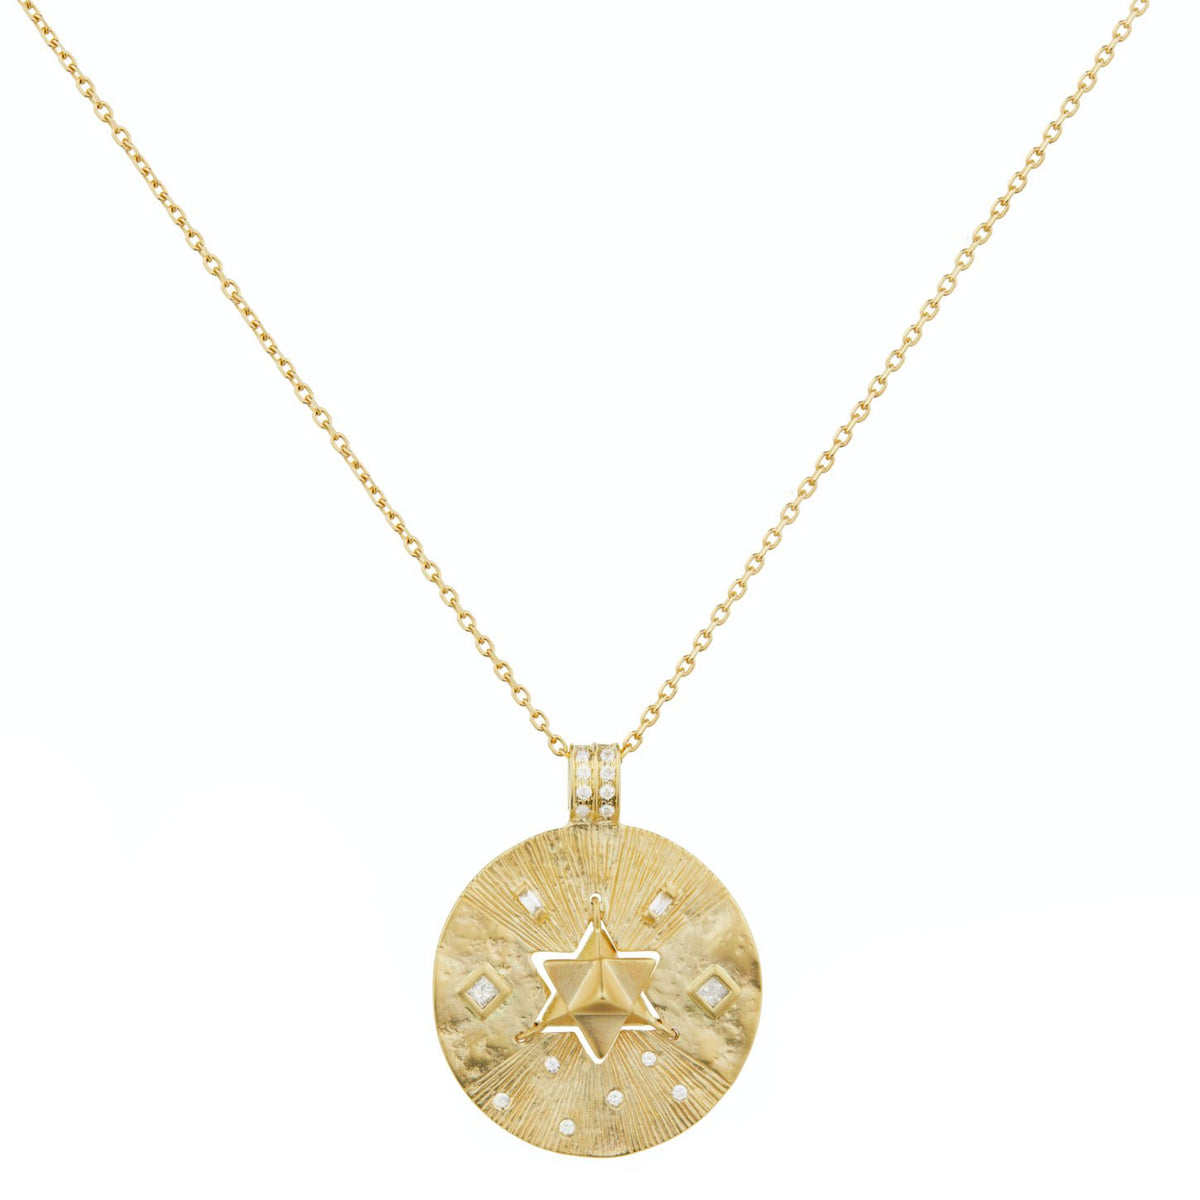 Old Coin Diamonds and Merkaba Medal Necklace